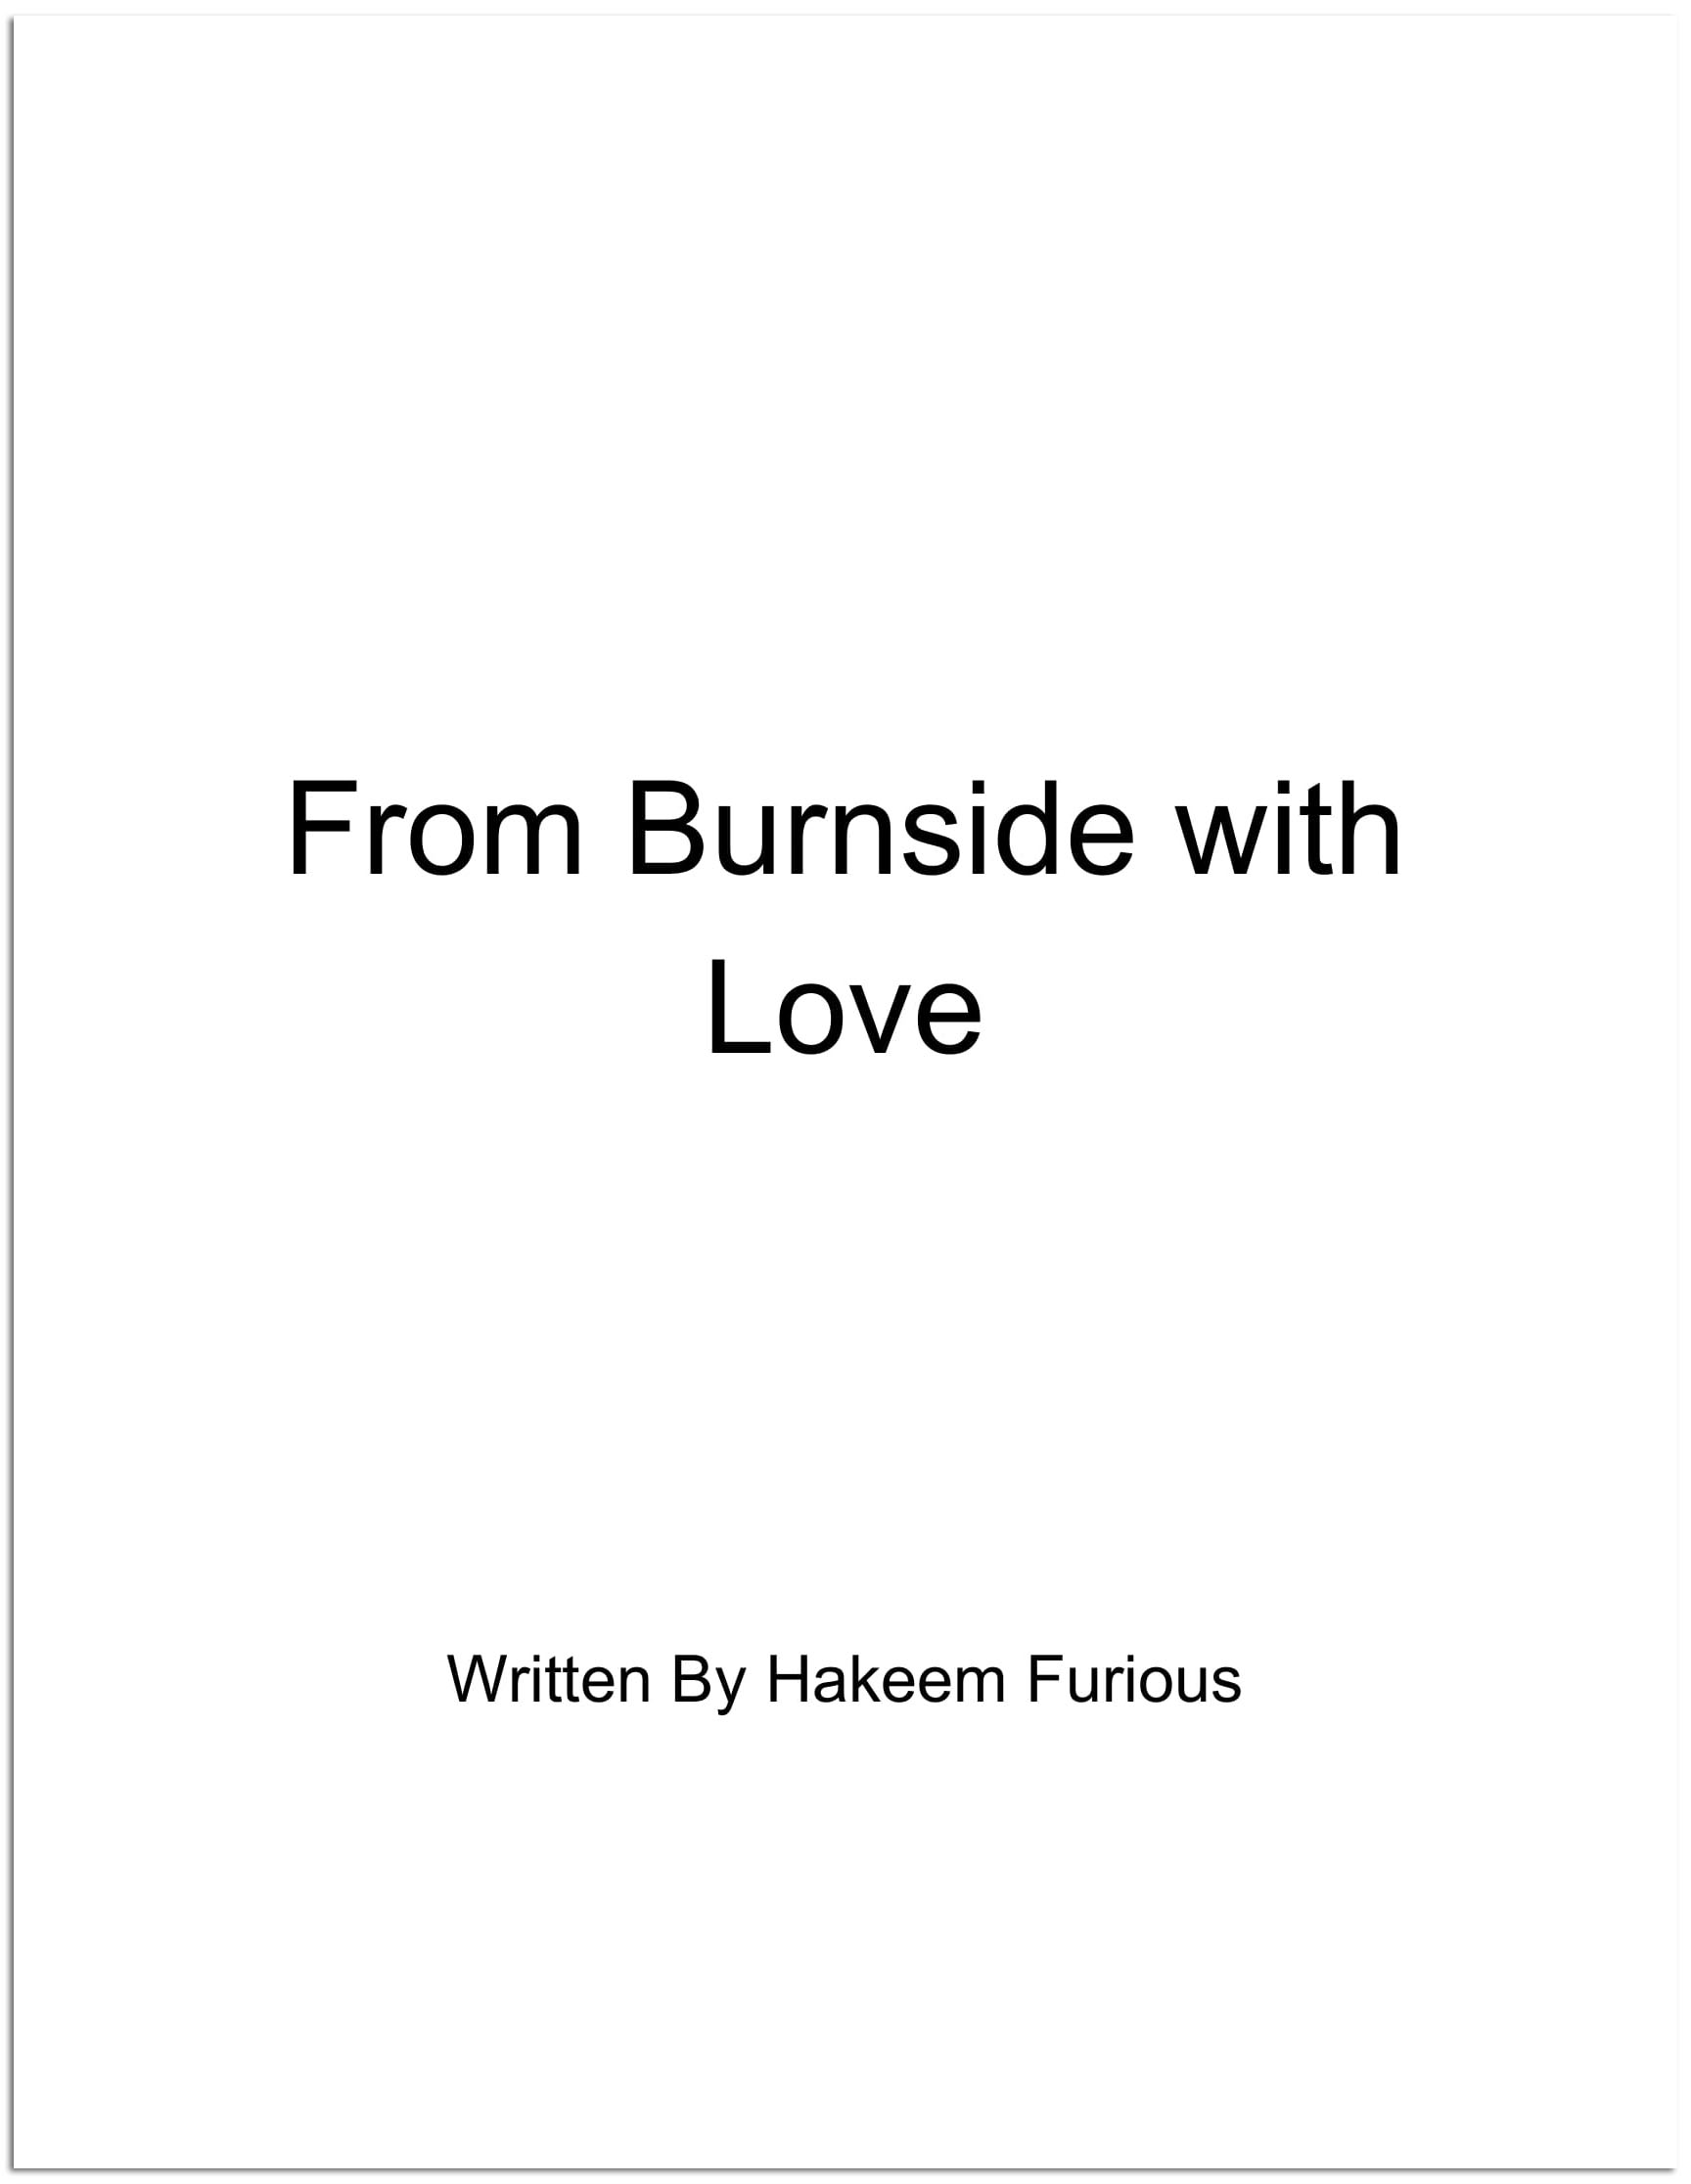 From Burnside with Love (2nd Draft)(1)-01.jpg